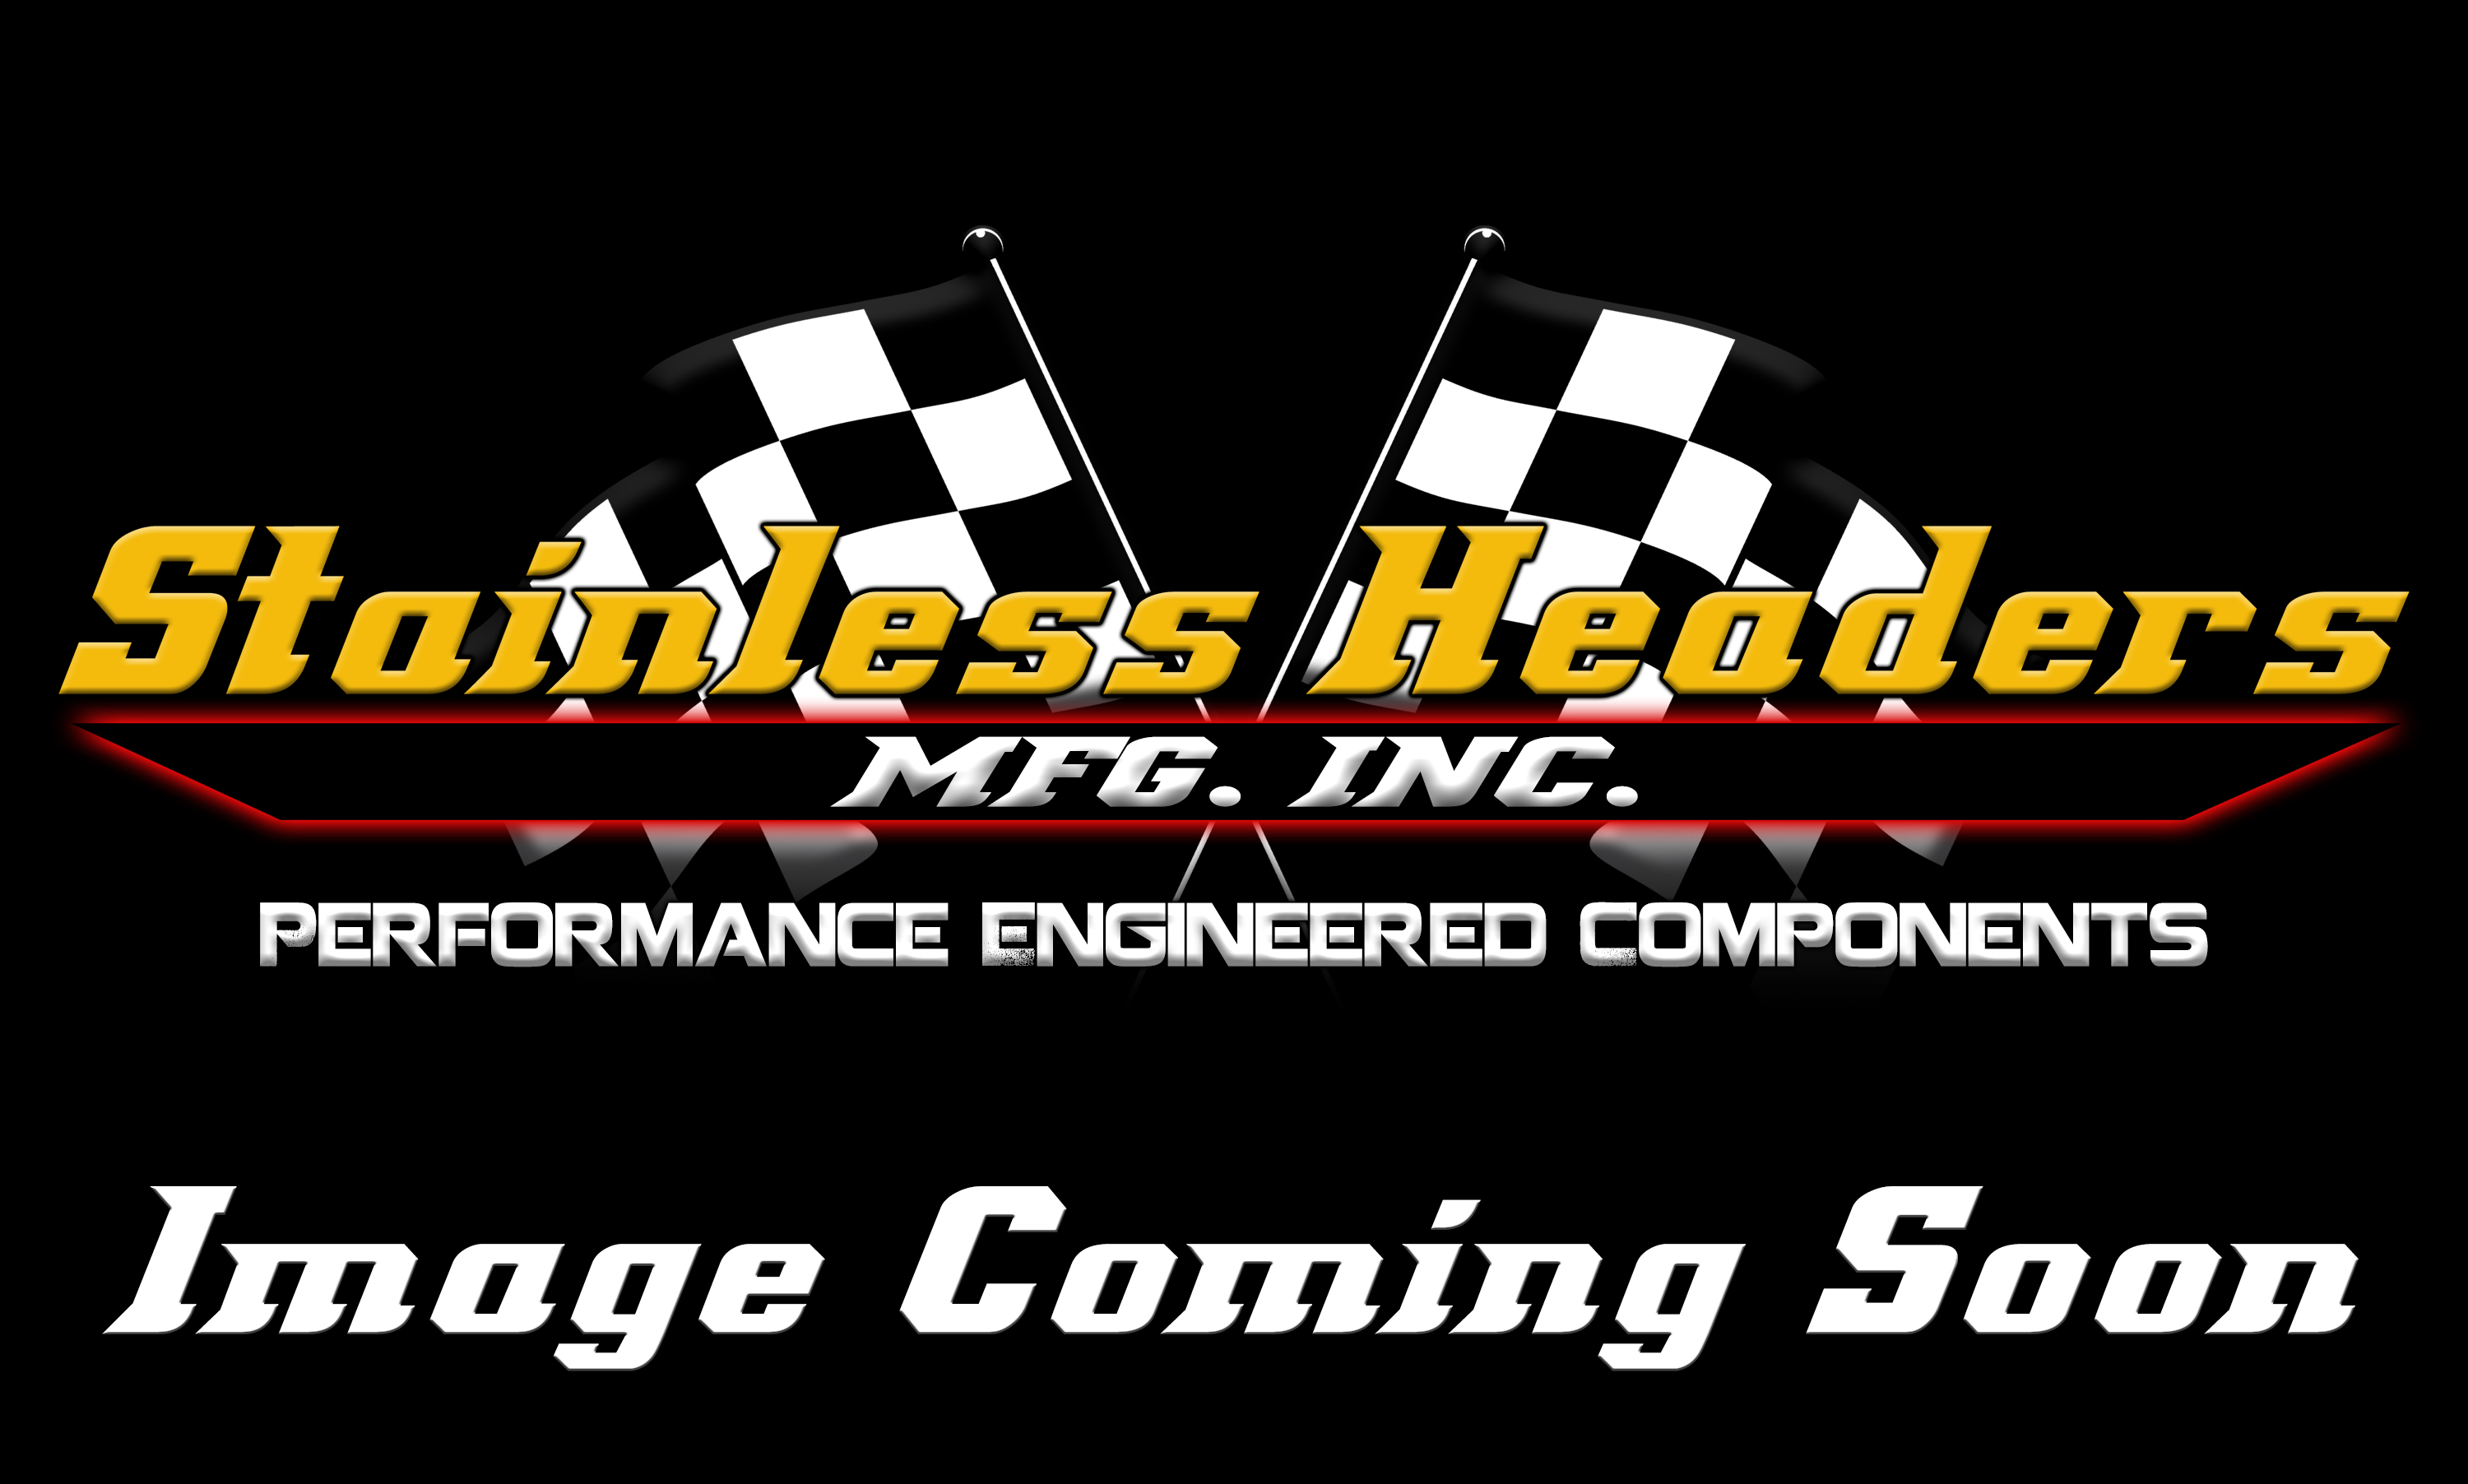 Stainless Headers - 2 1/4" Primary 2 into 1 Performance Merge Collector-16ga 321ss